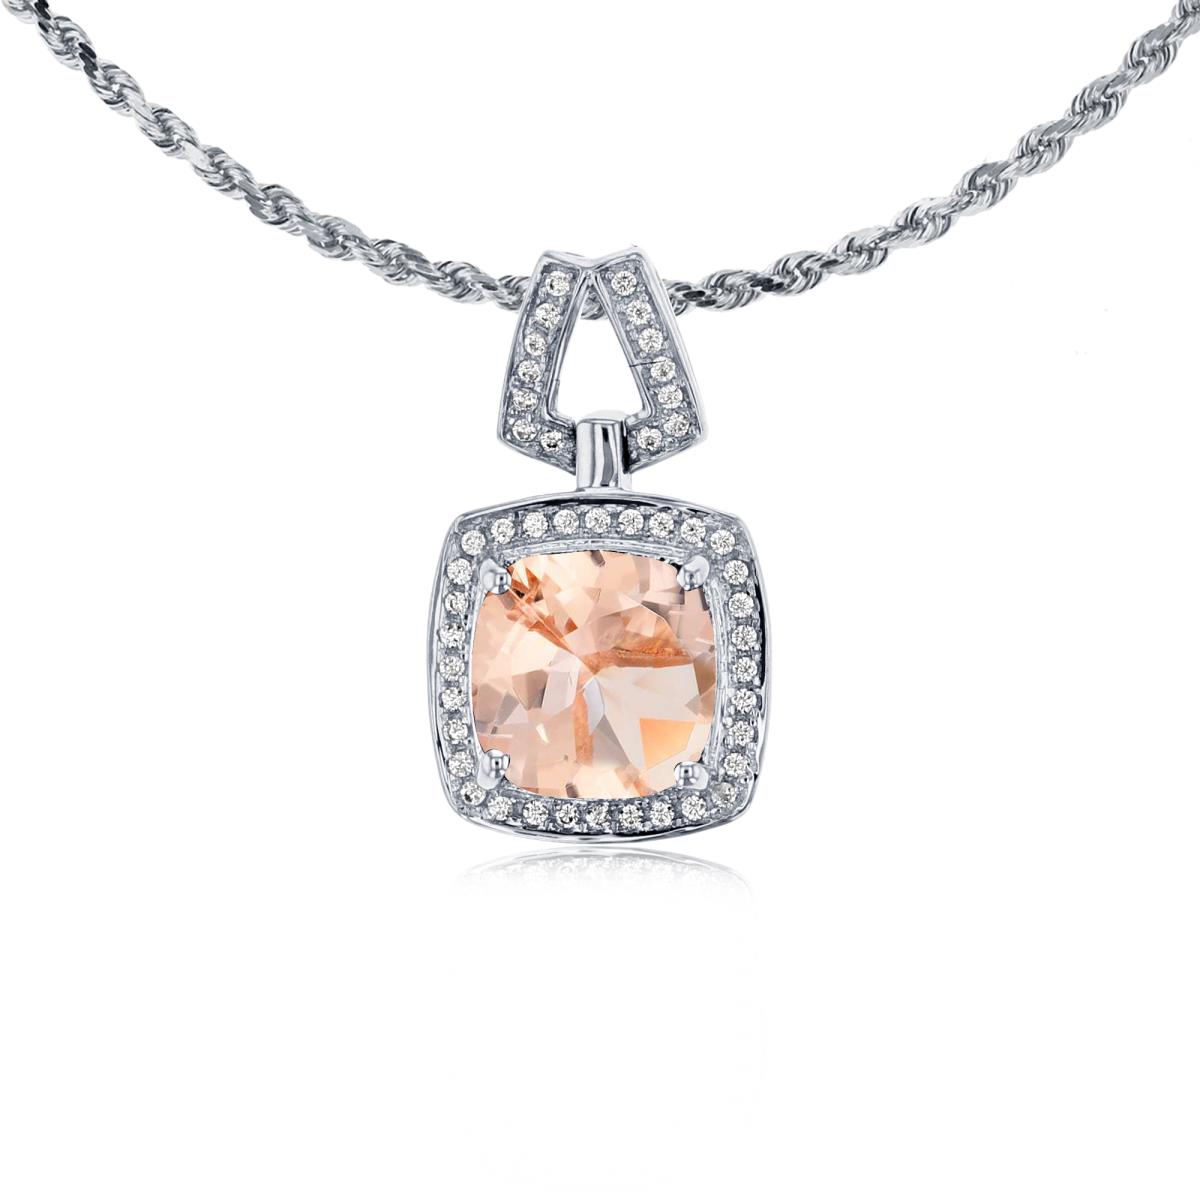 10K White Gold 7mm Cushion Morganite & 0.10 CTTW Diamond Halo 18" Rope Chain Necklace